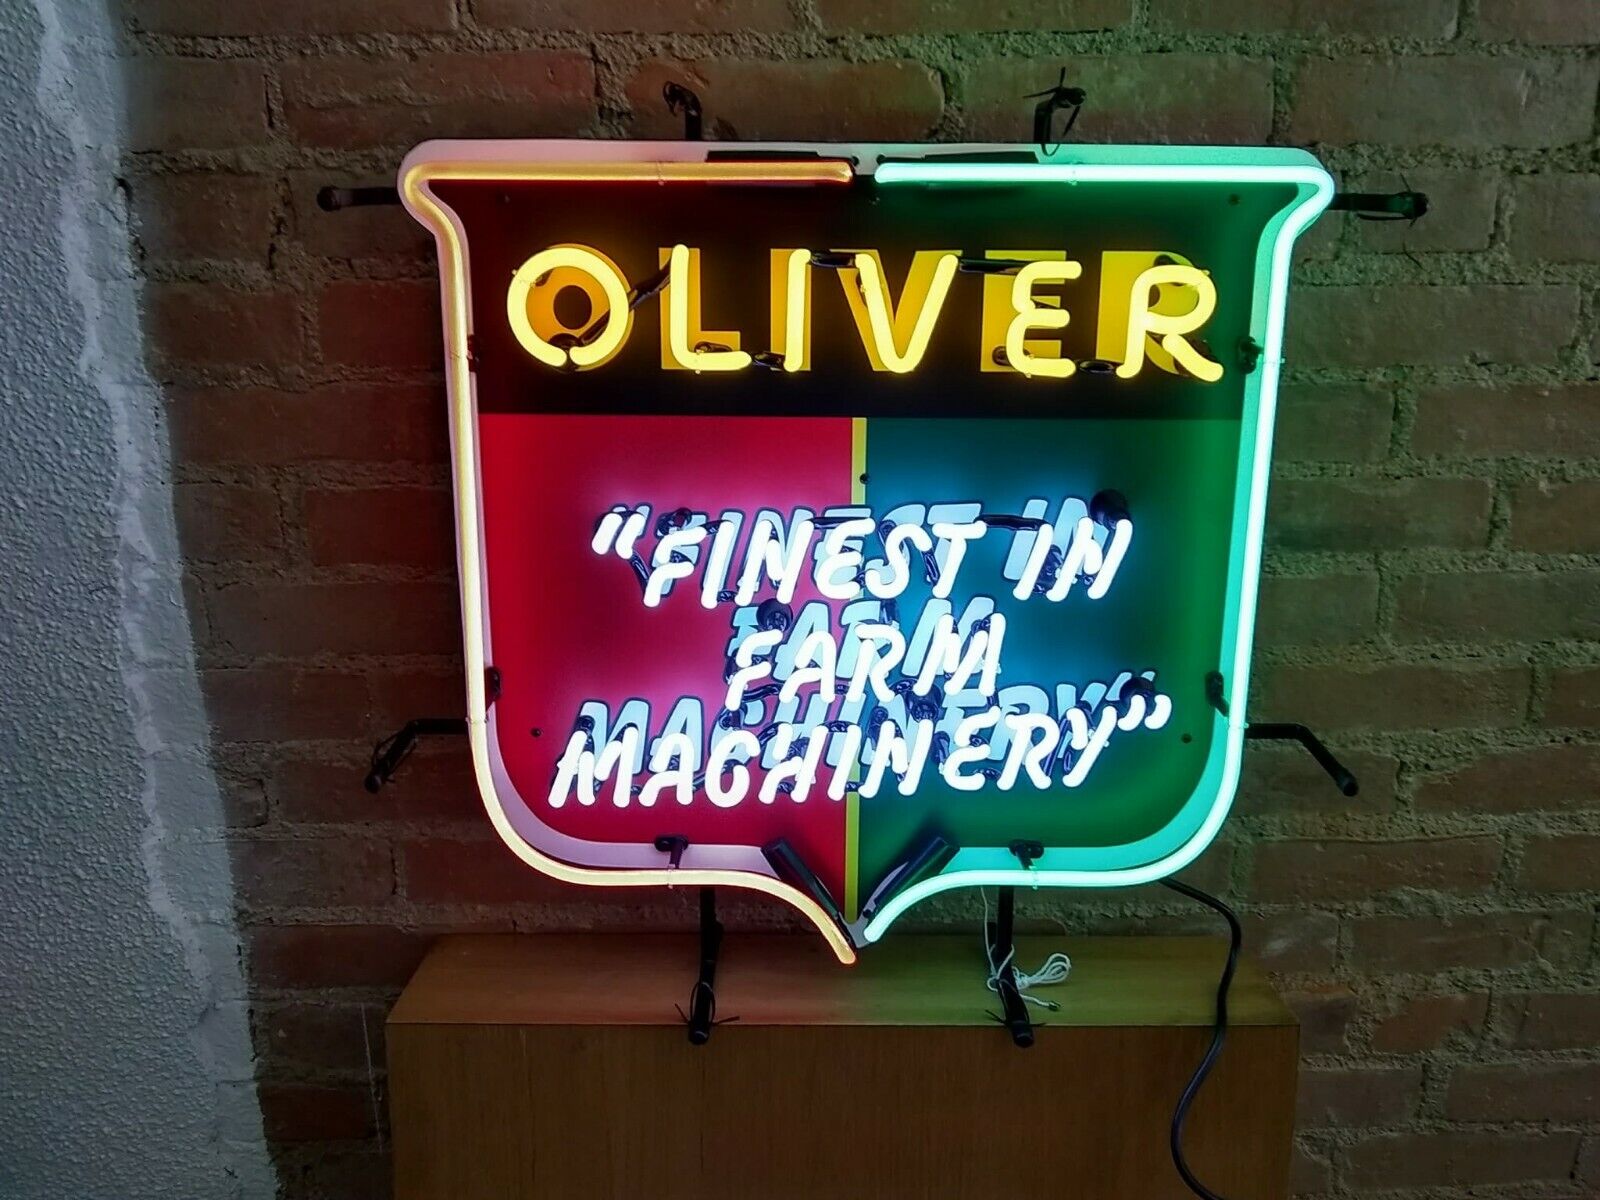 New Oliver Finest in Farm Machinery Neon Sign 24